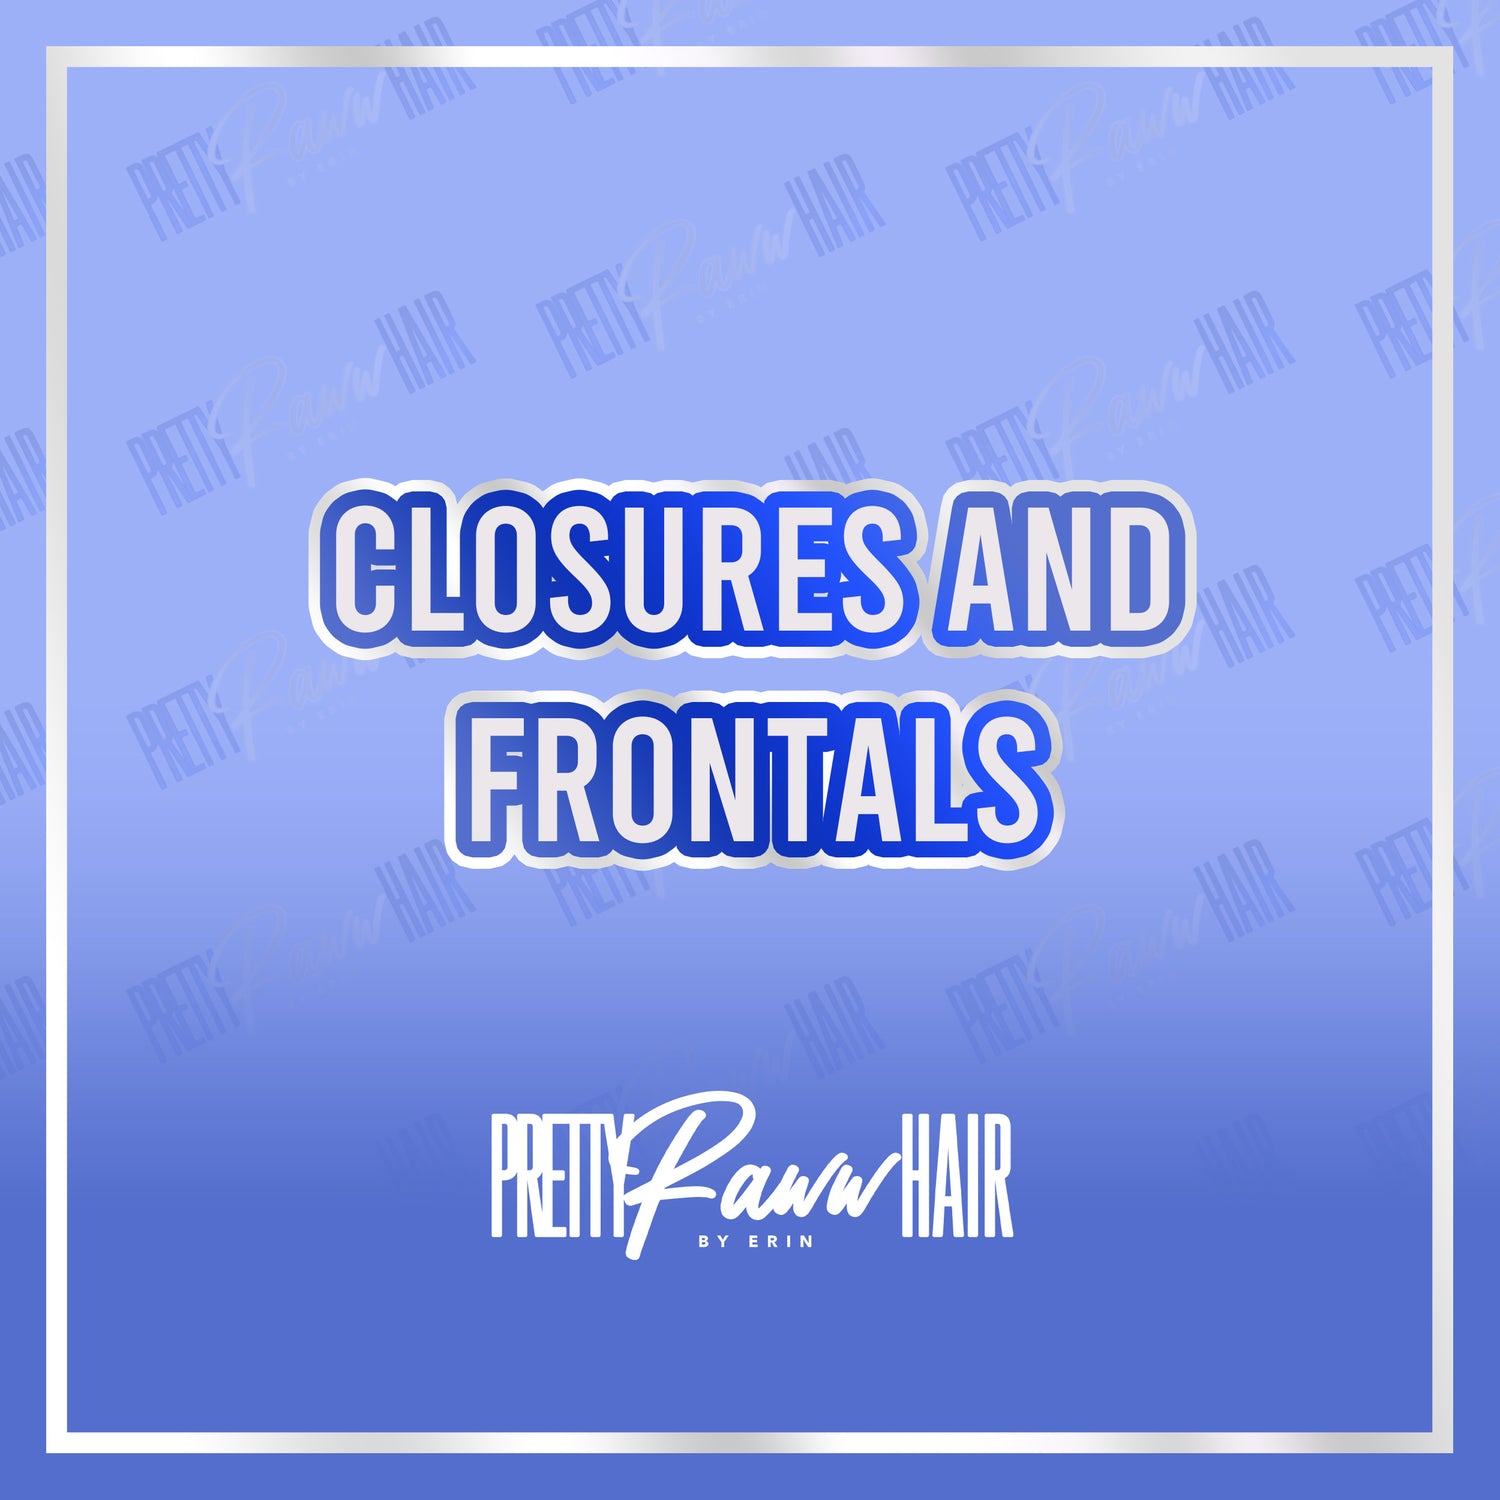 CLOSURES AND FRONTALS